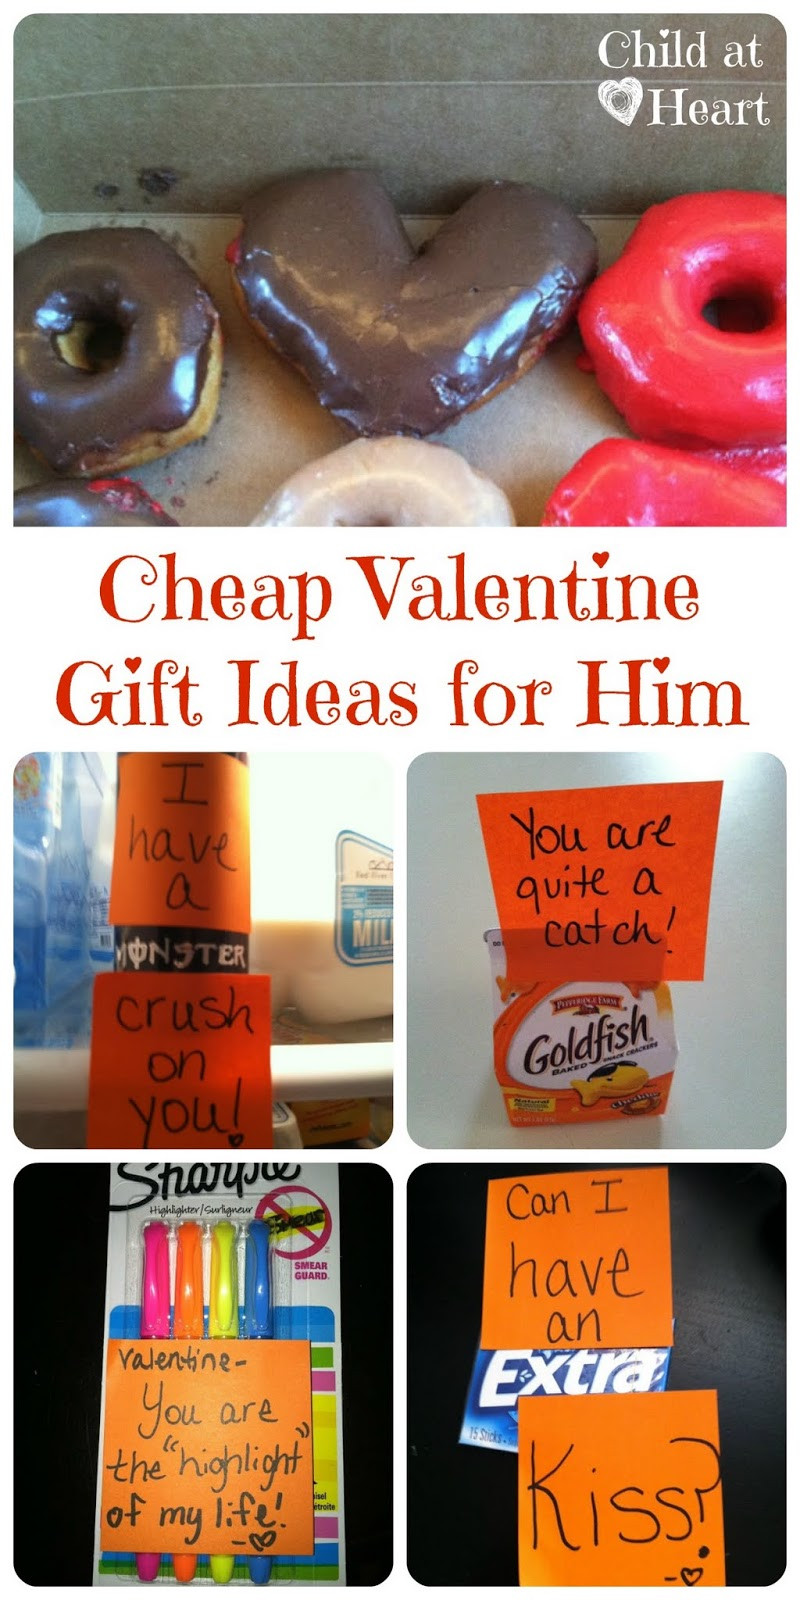 Valentines Cheap Gift Ideas
 301 Moved Permanently